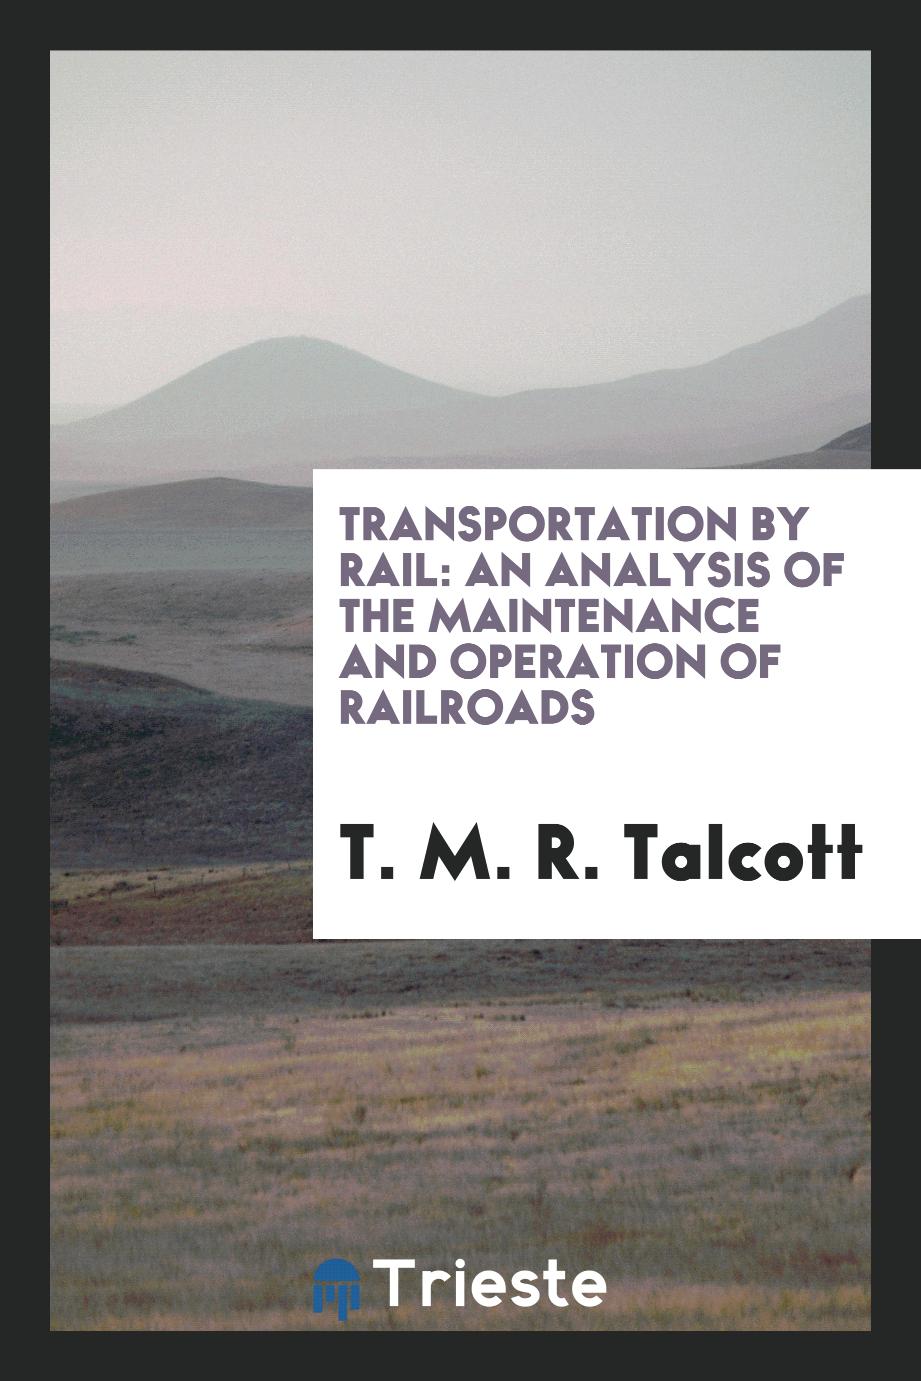 Transportation by Rail: An Analysis of the Maintenance and Operation of railroads